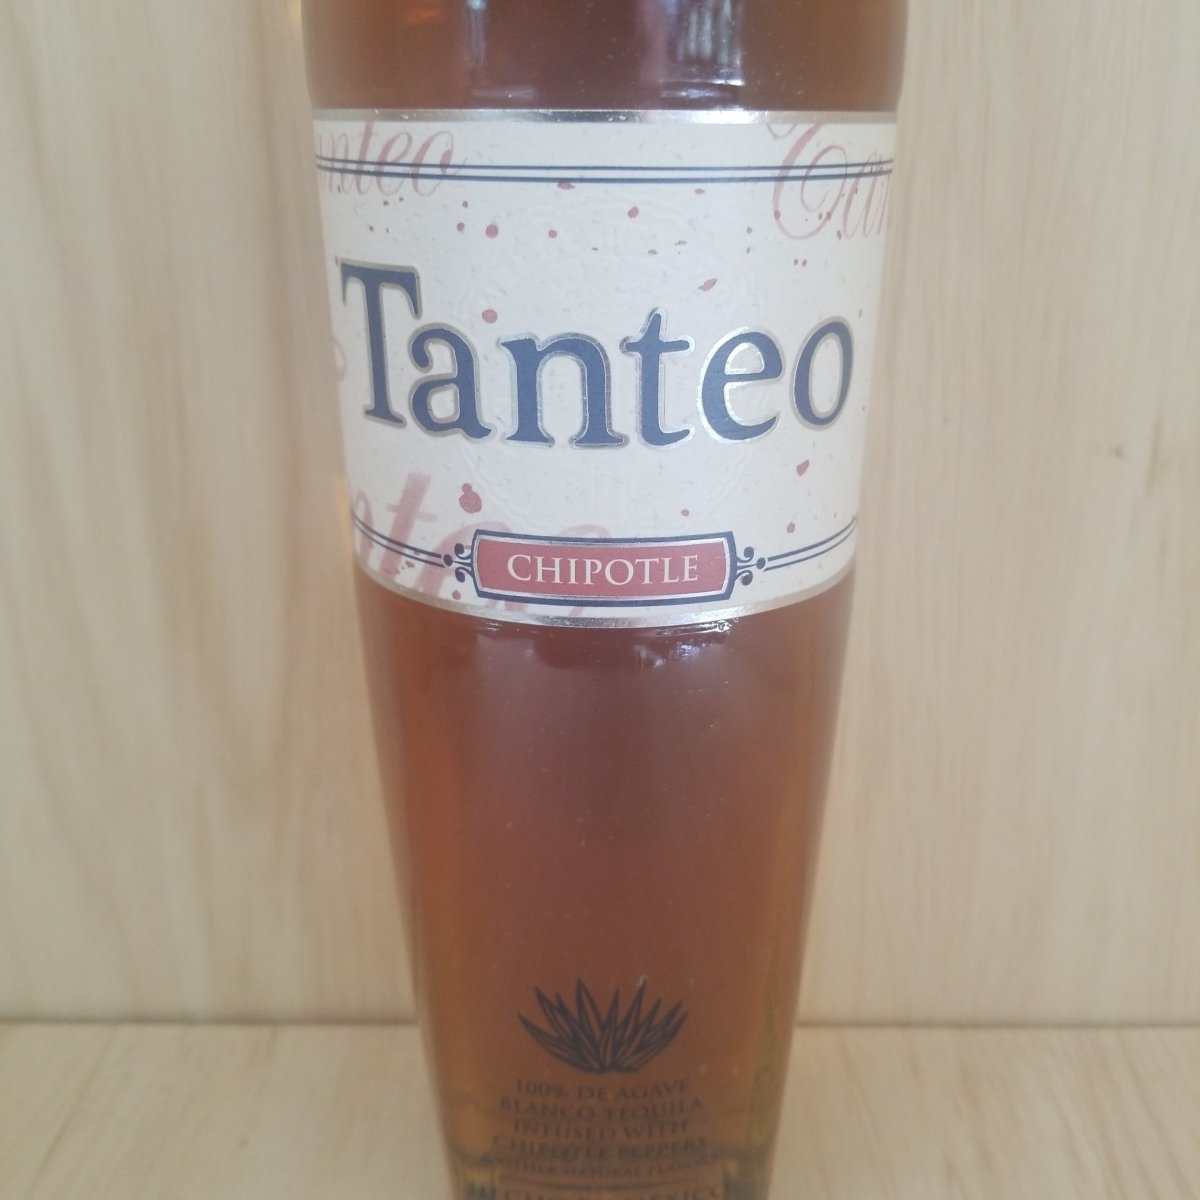 Tanteo Chipotle Tequila 750ml - Sip & Say